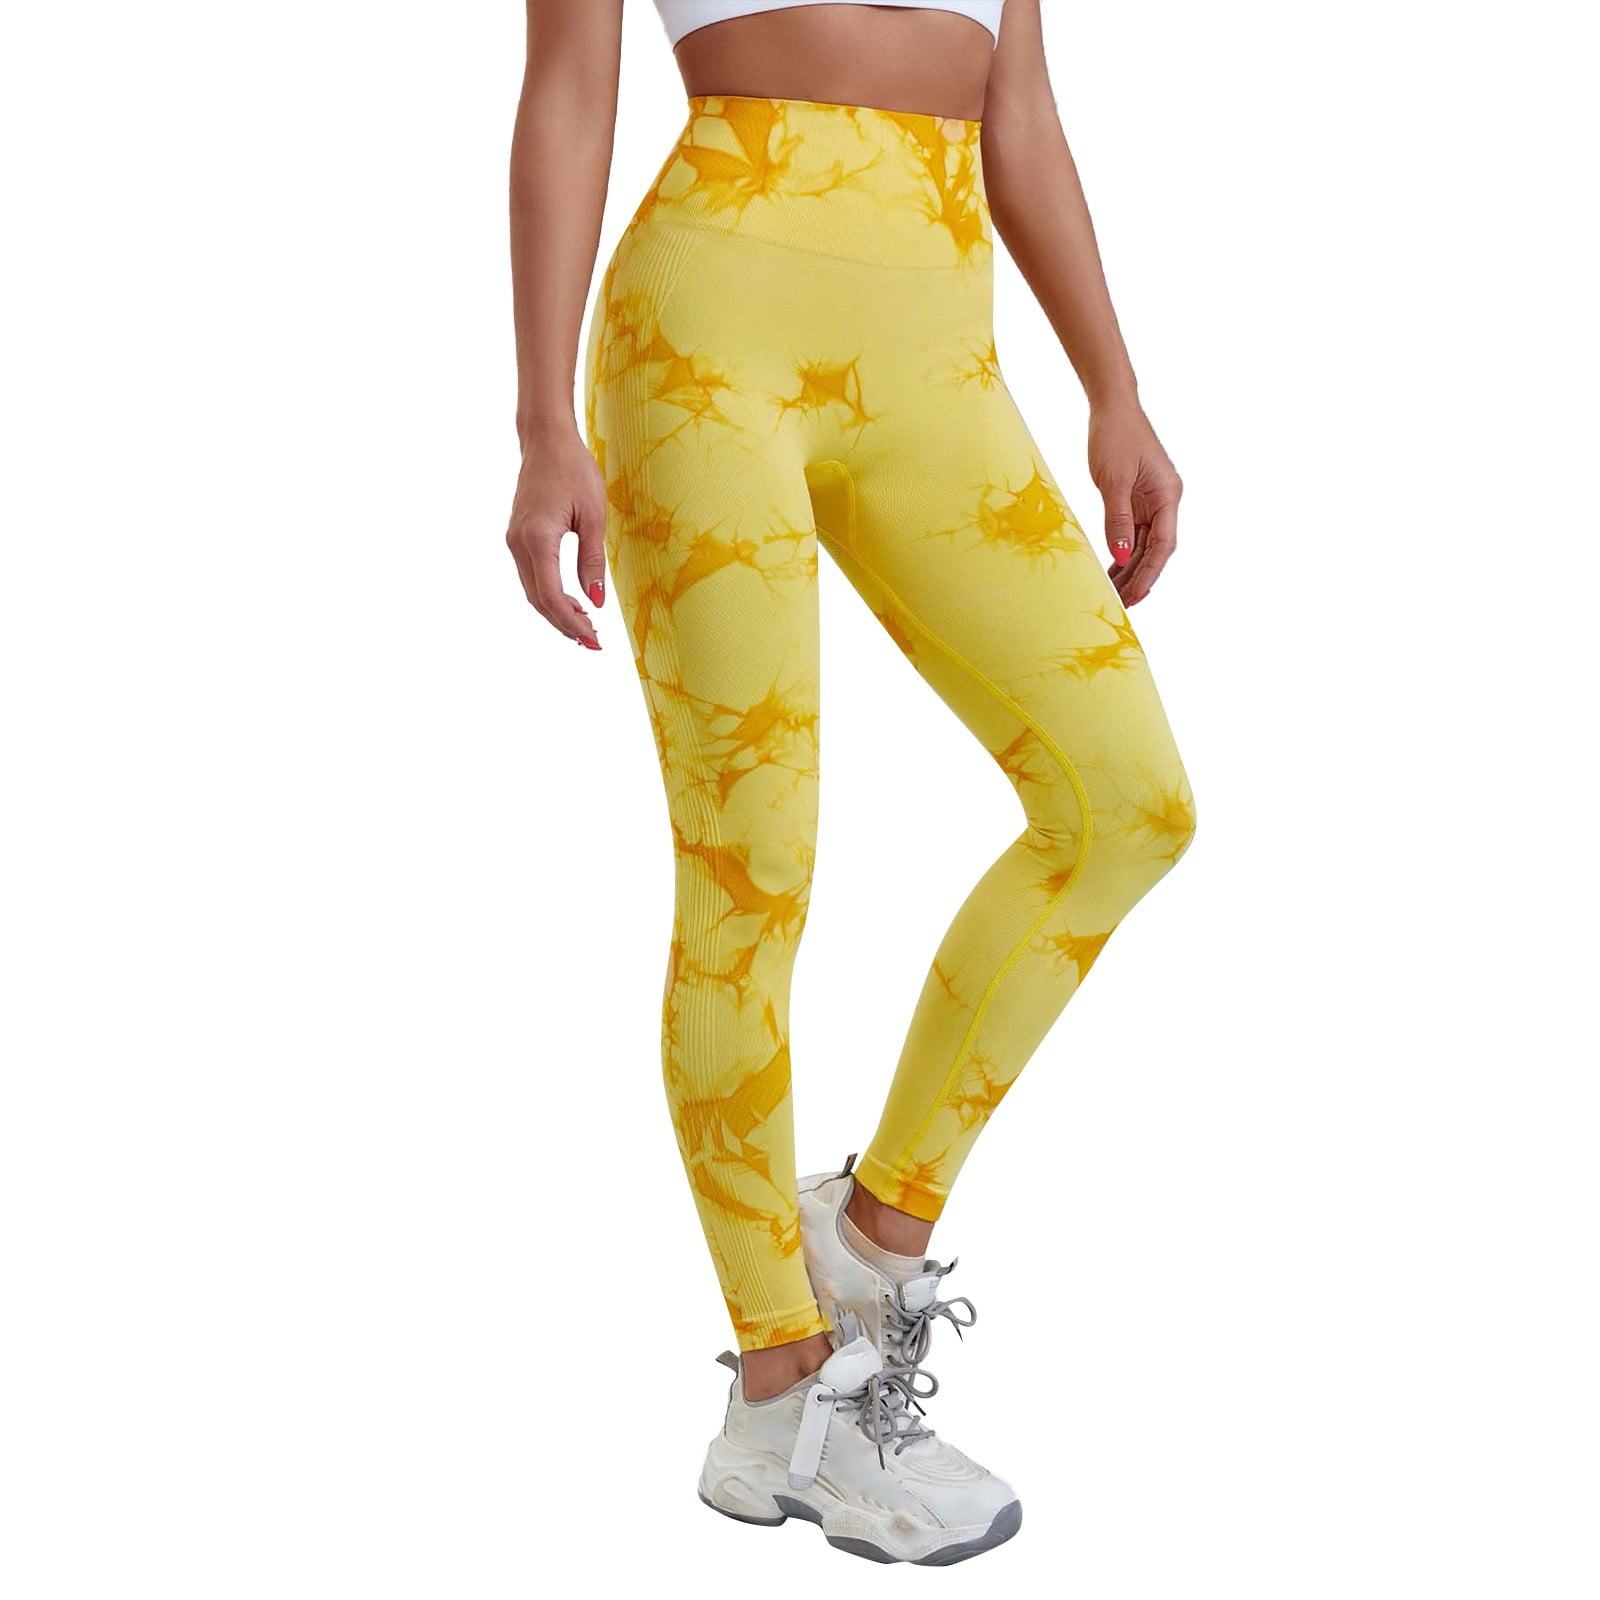 adviicd Yoga Pants For Girls Cotton Yoga Pants For Women Summer Sportswear  High Waist Fitness pants 2 In 1 Stretch Quick Dry Loose Yoga Gym Breathable  Running pants For Women Yellow M 